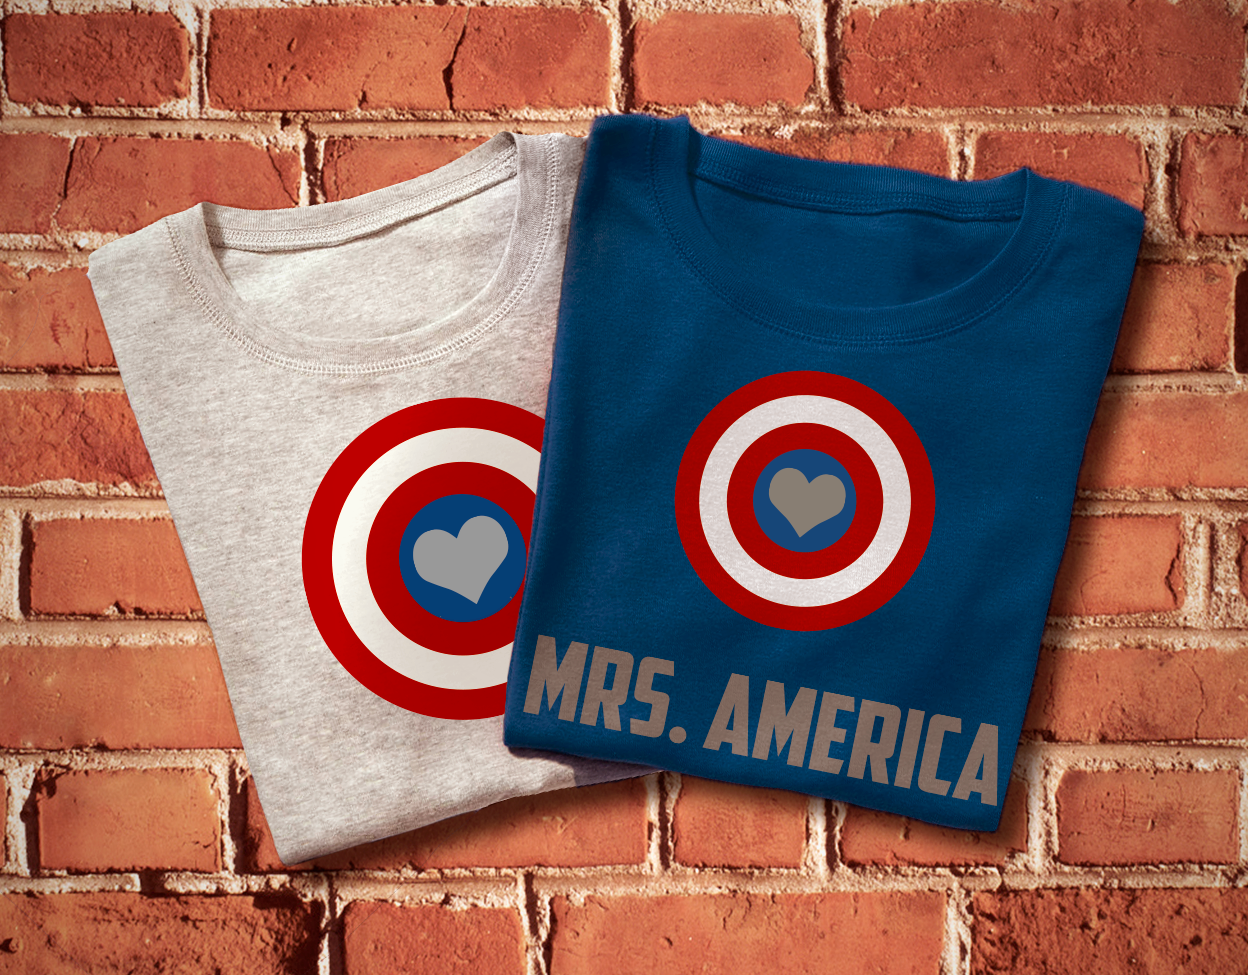 Target with a heart in the middle and the words "Mrs. America" below.